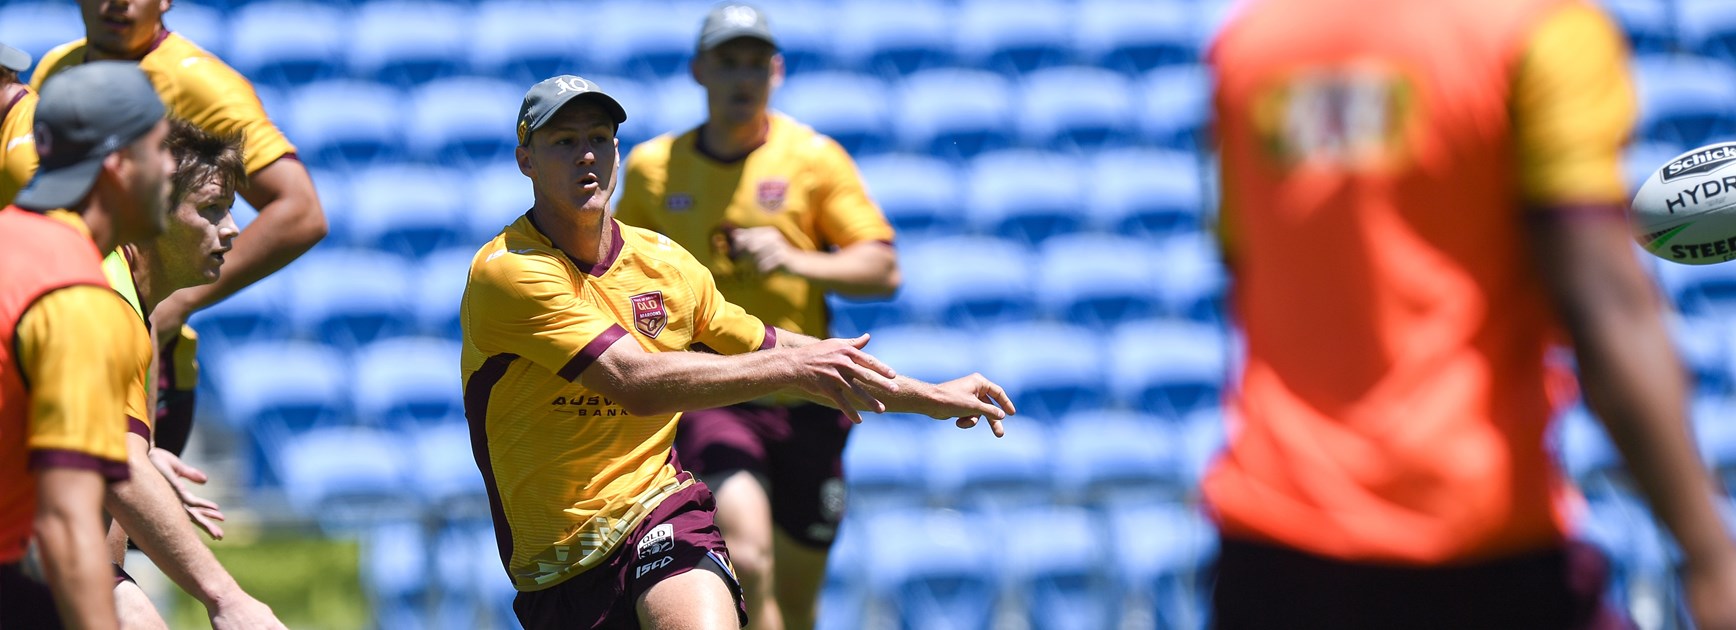 No fear here: DCE adamant young Maroons won't be overawed